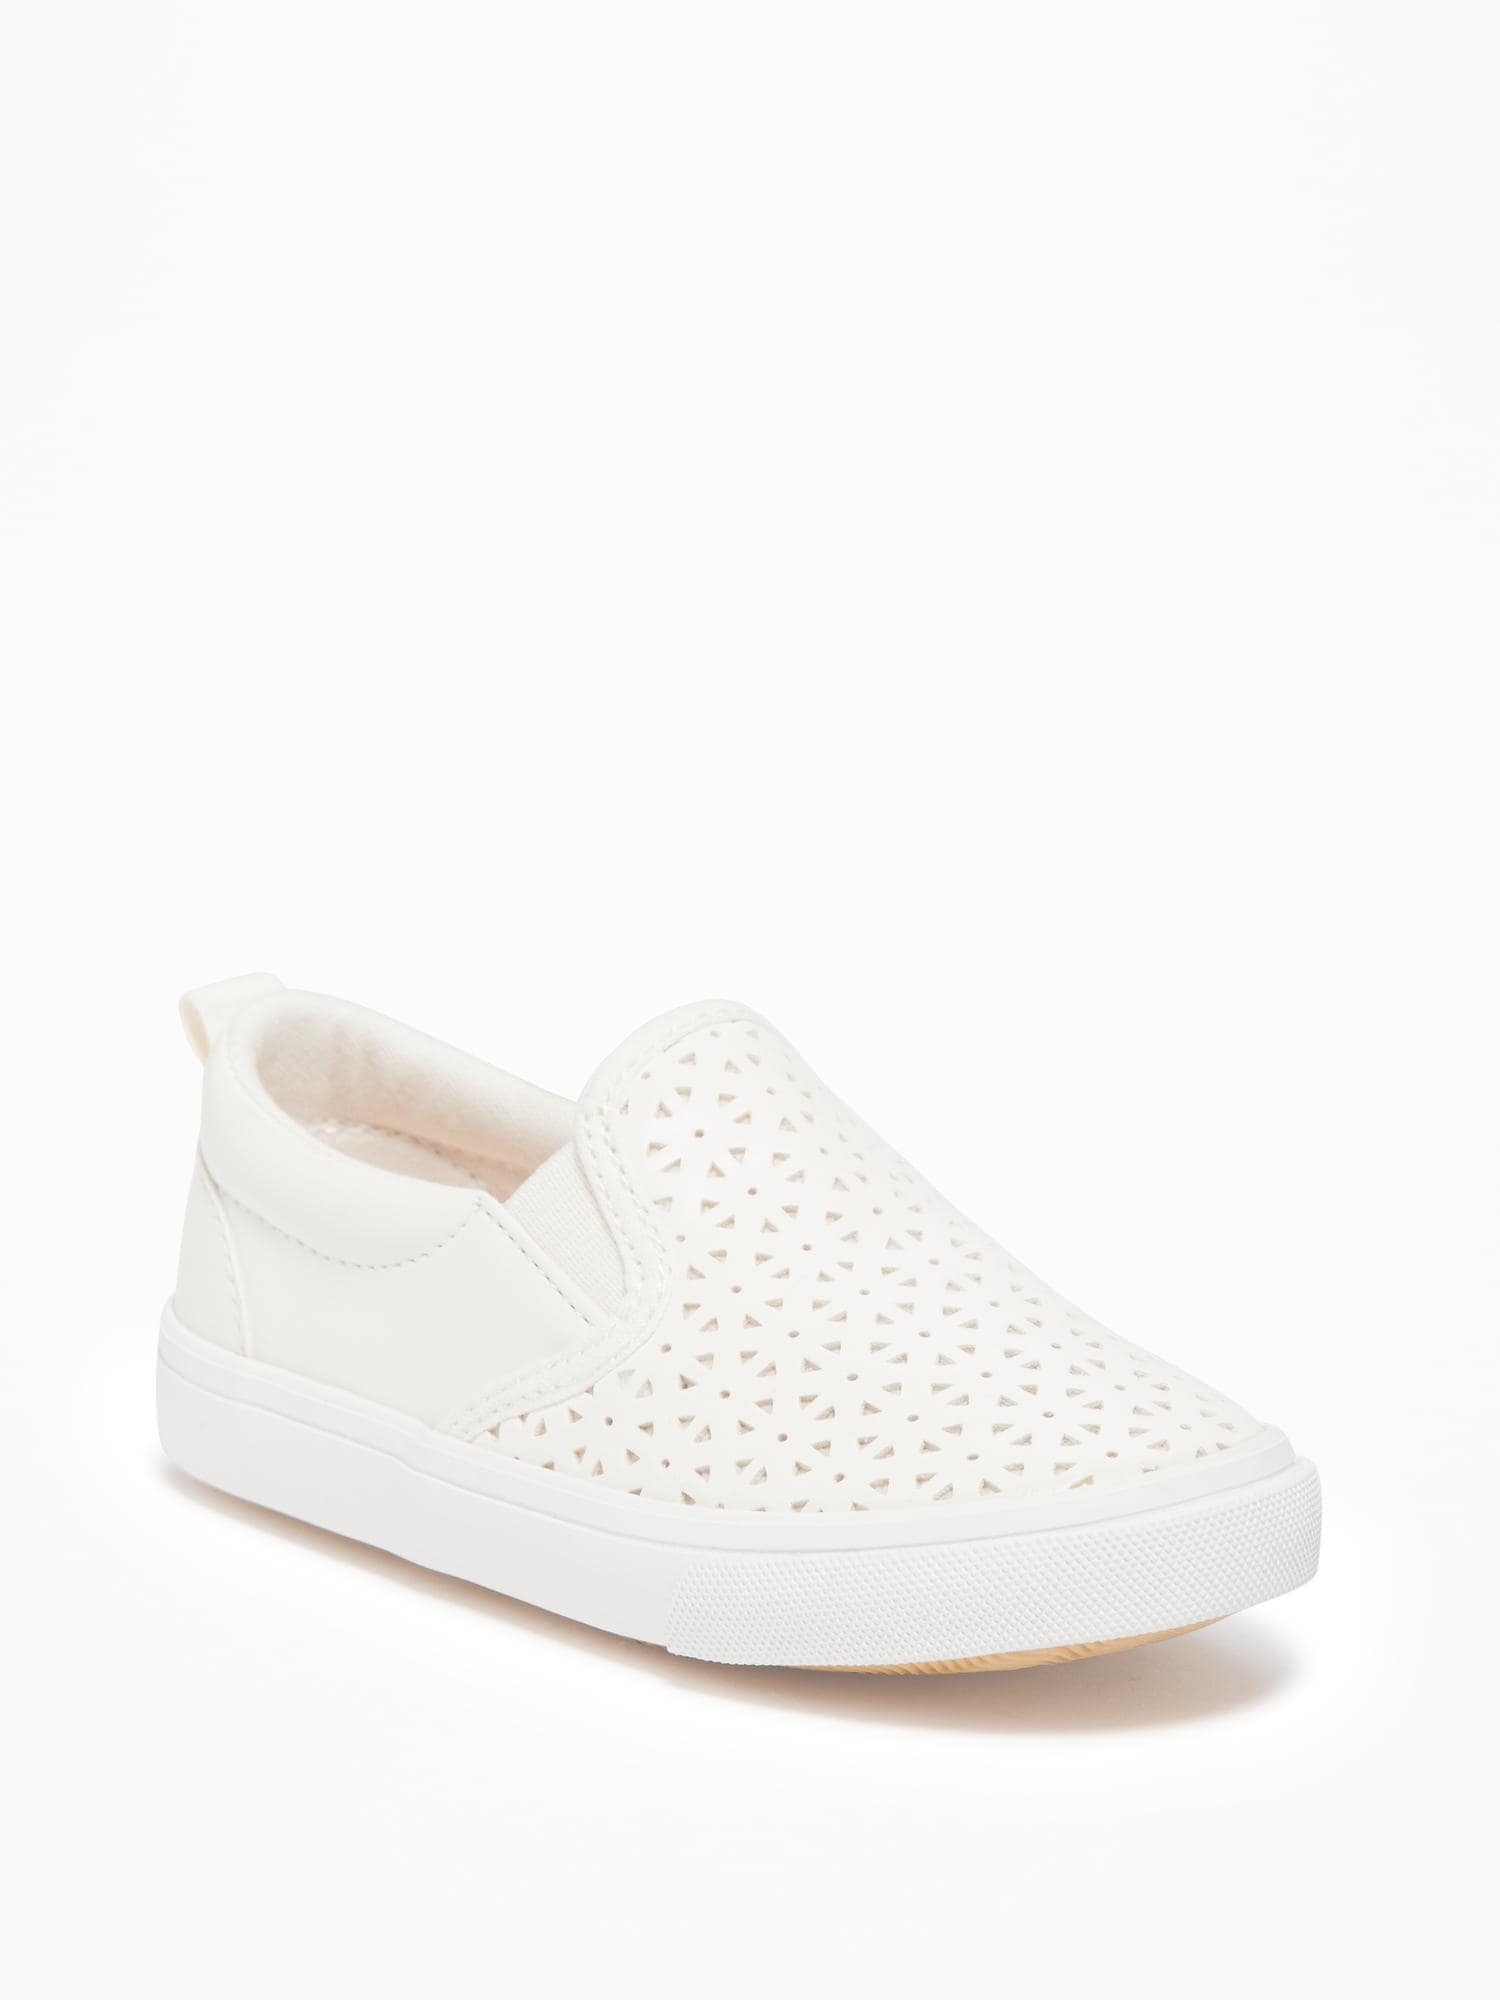 Perforated Slip-Ons For Toddler Girls | Old Navy